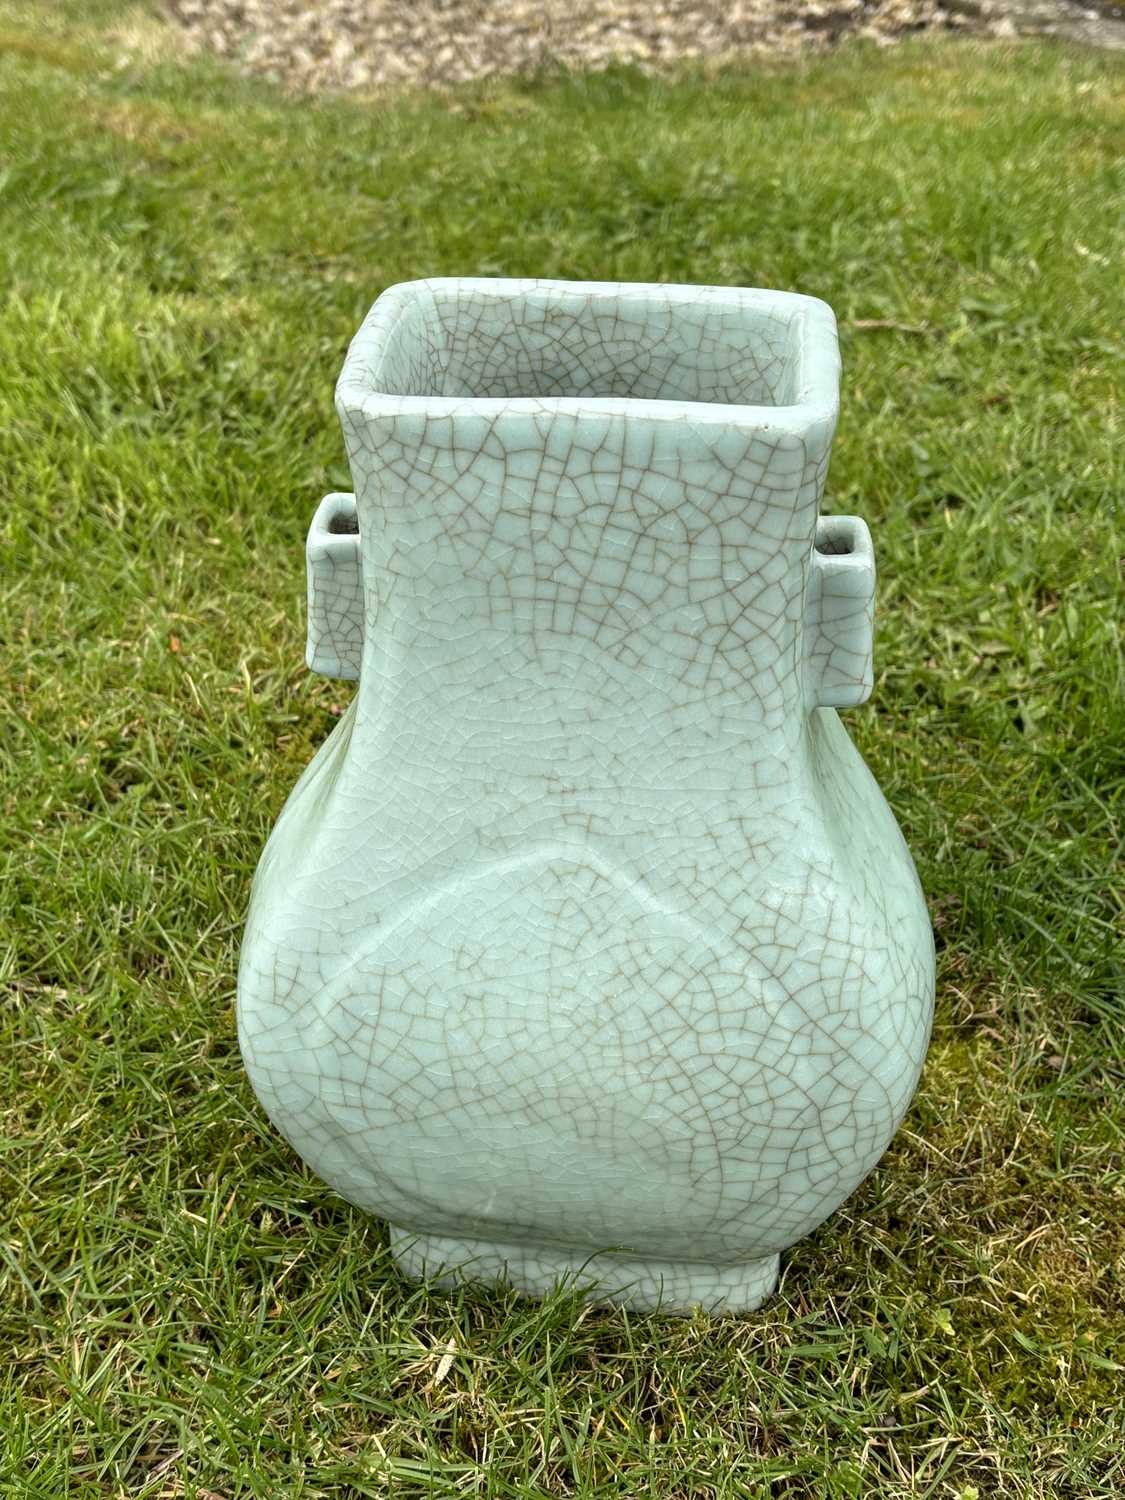 A GE-TYPE FACETED FANGHU-FORM VASE - Image 9 of 9